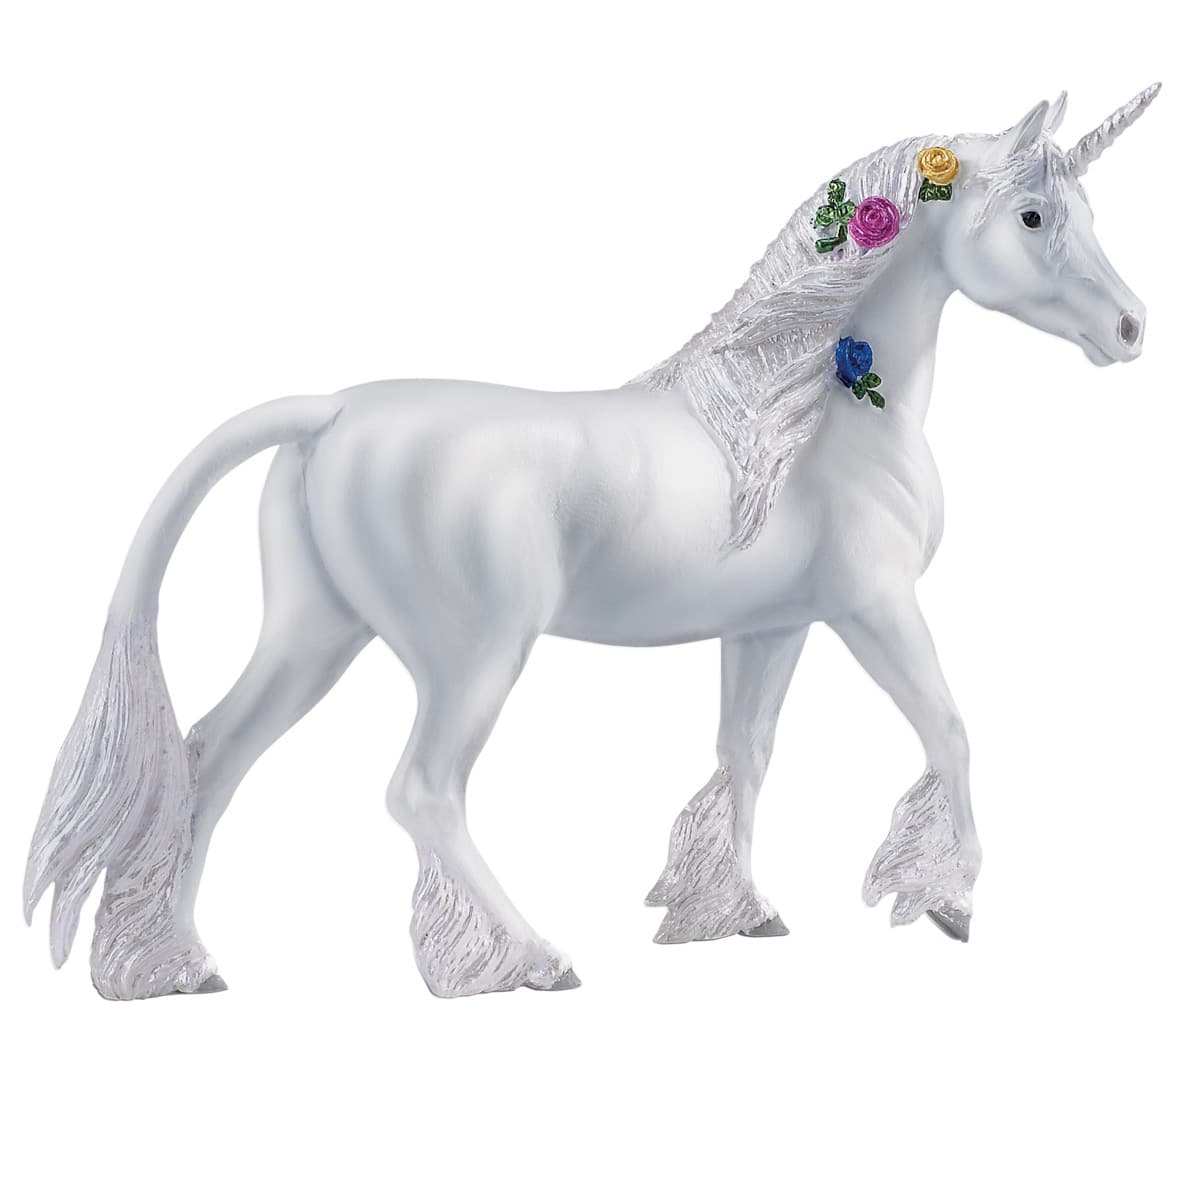 Paint Your Own Unicorn For Kids Present, Best Unicorn Toys